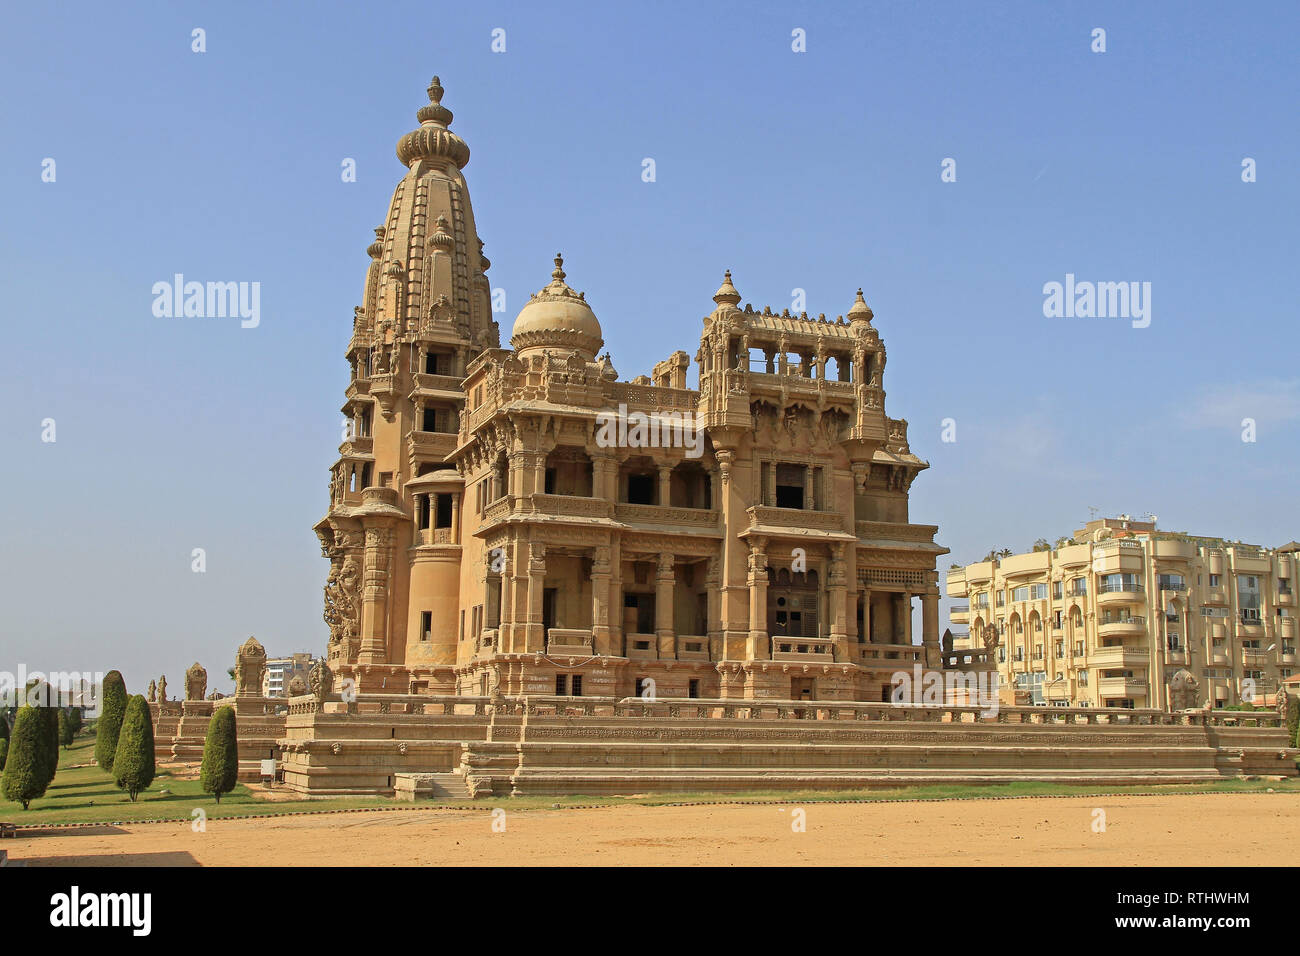 Cairo, Egypt - March 03, 2010: Abandoned Baron Empain Palace in Heliopolis City in Cairo, Egypt. Stock Photo